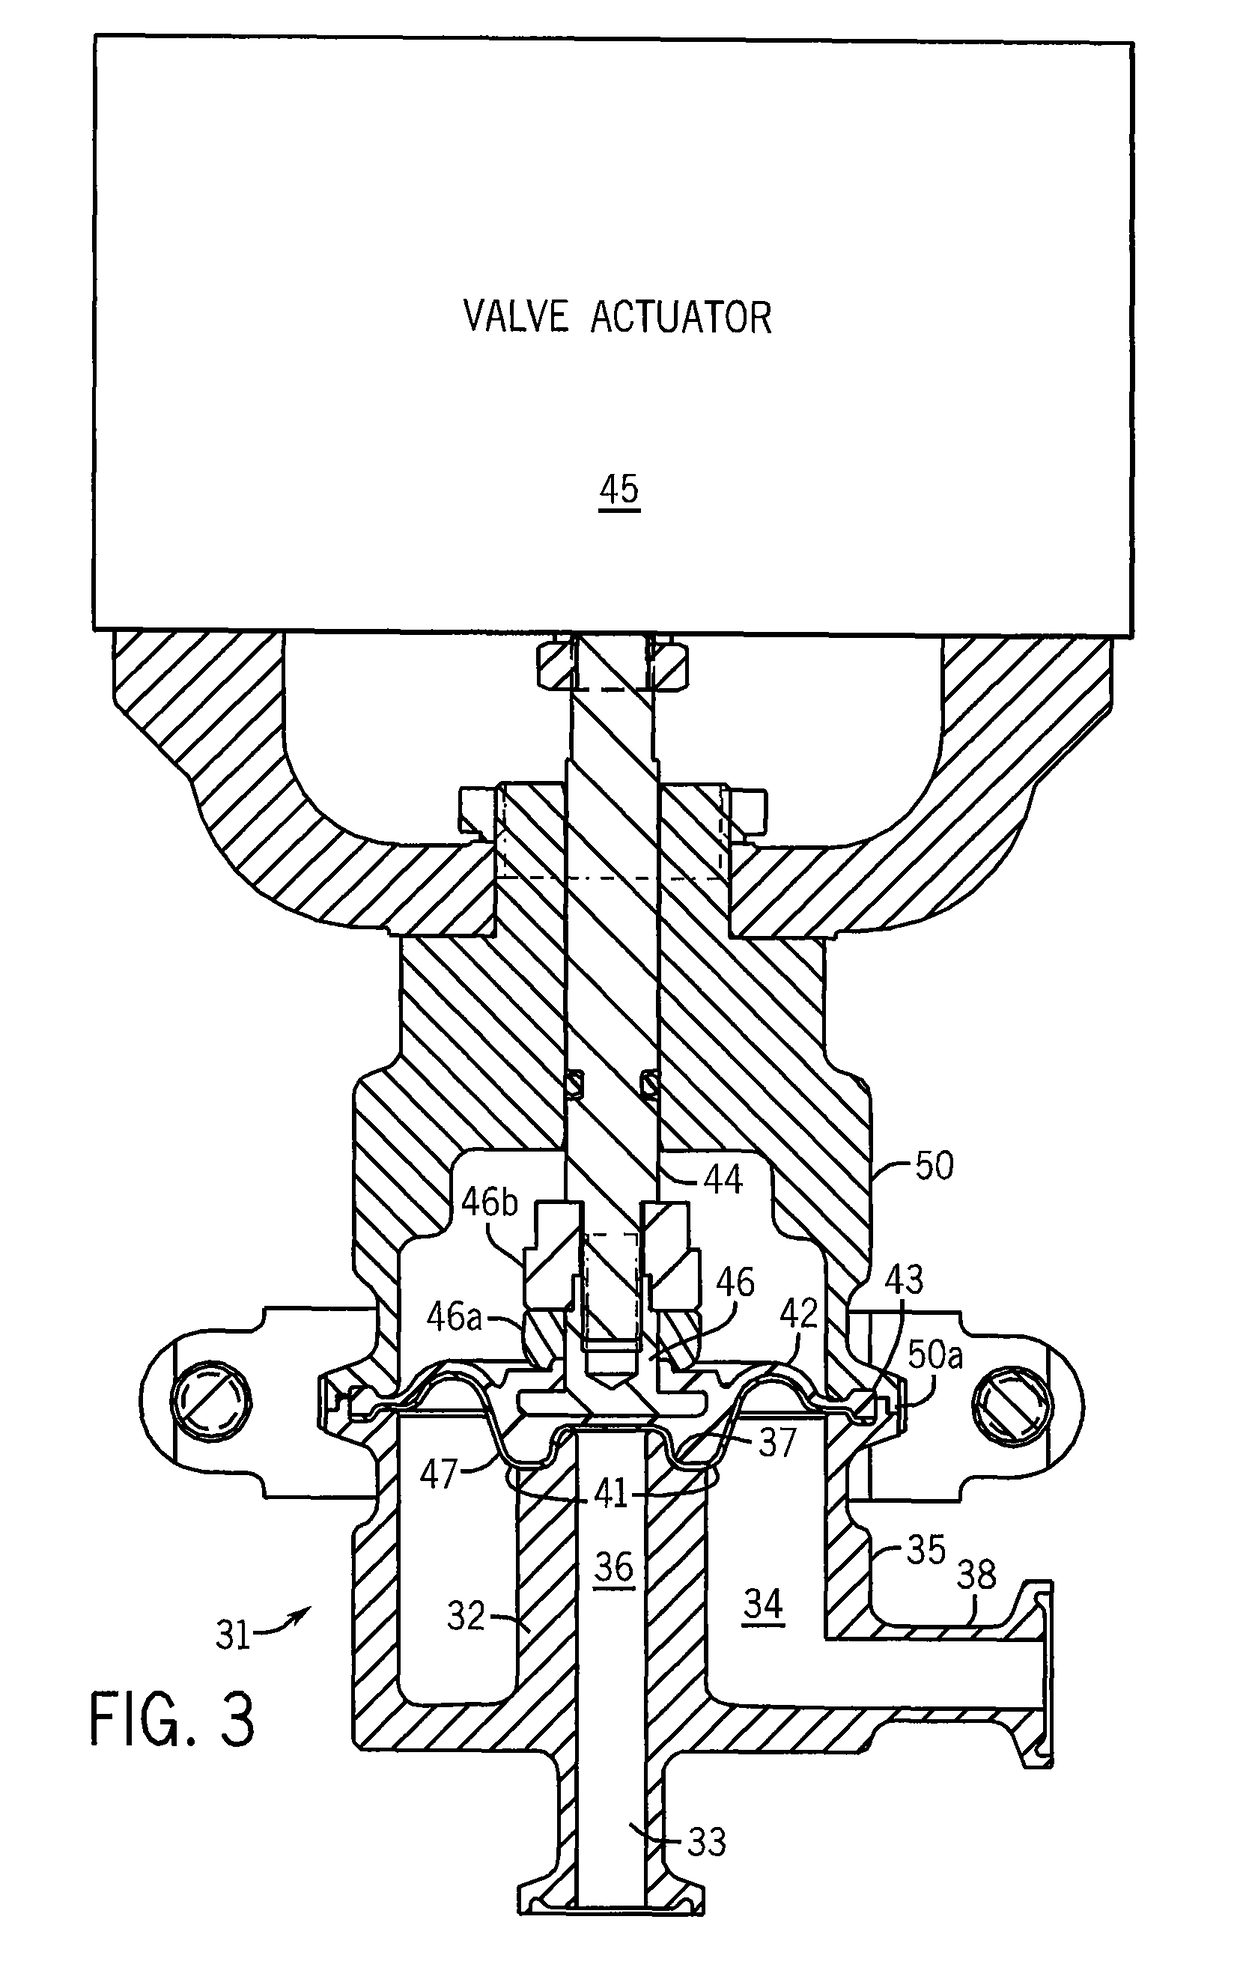 Aseptic flow control valve with outside diameter valve closure